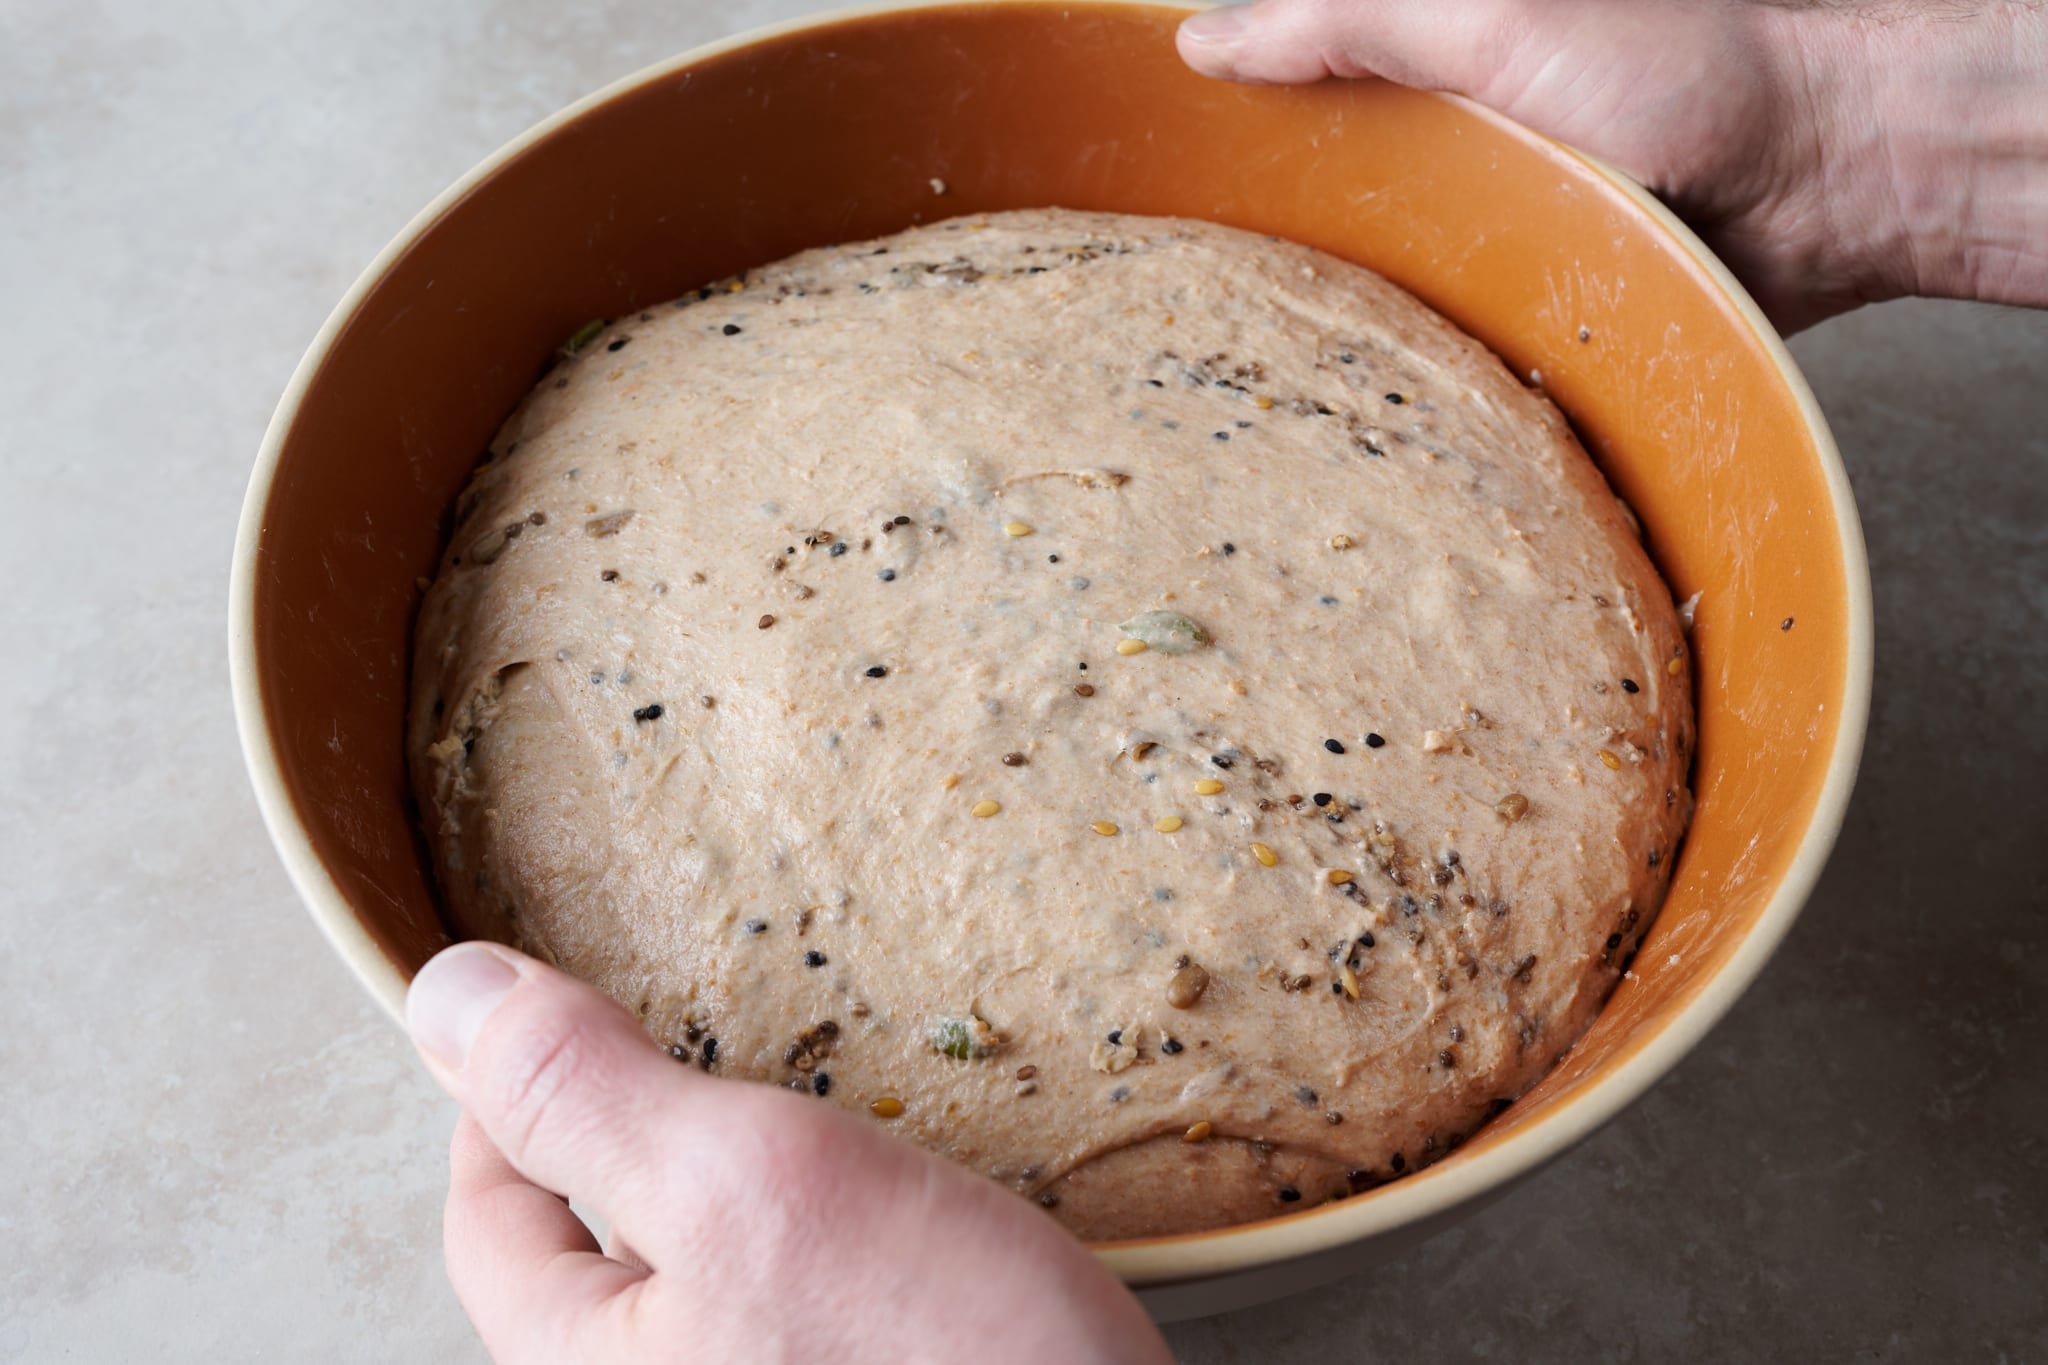 The Importance of Dough Temperature in Baking